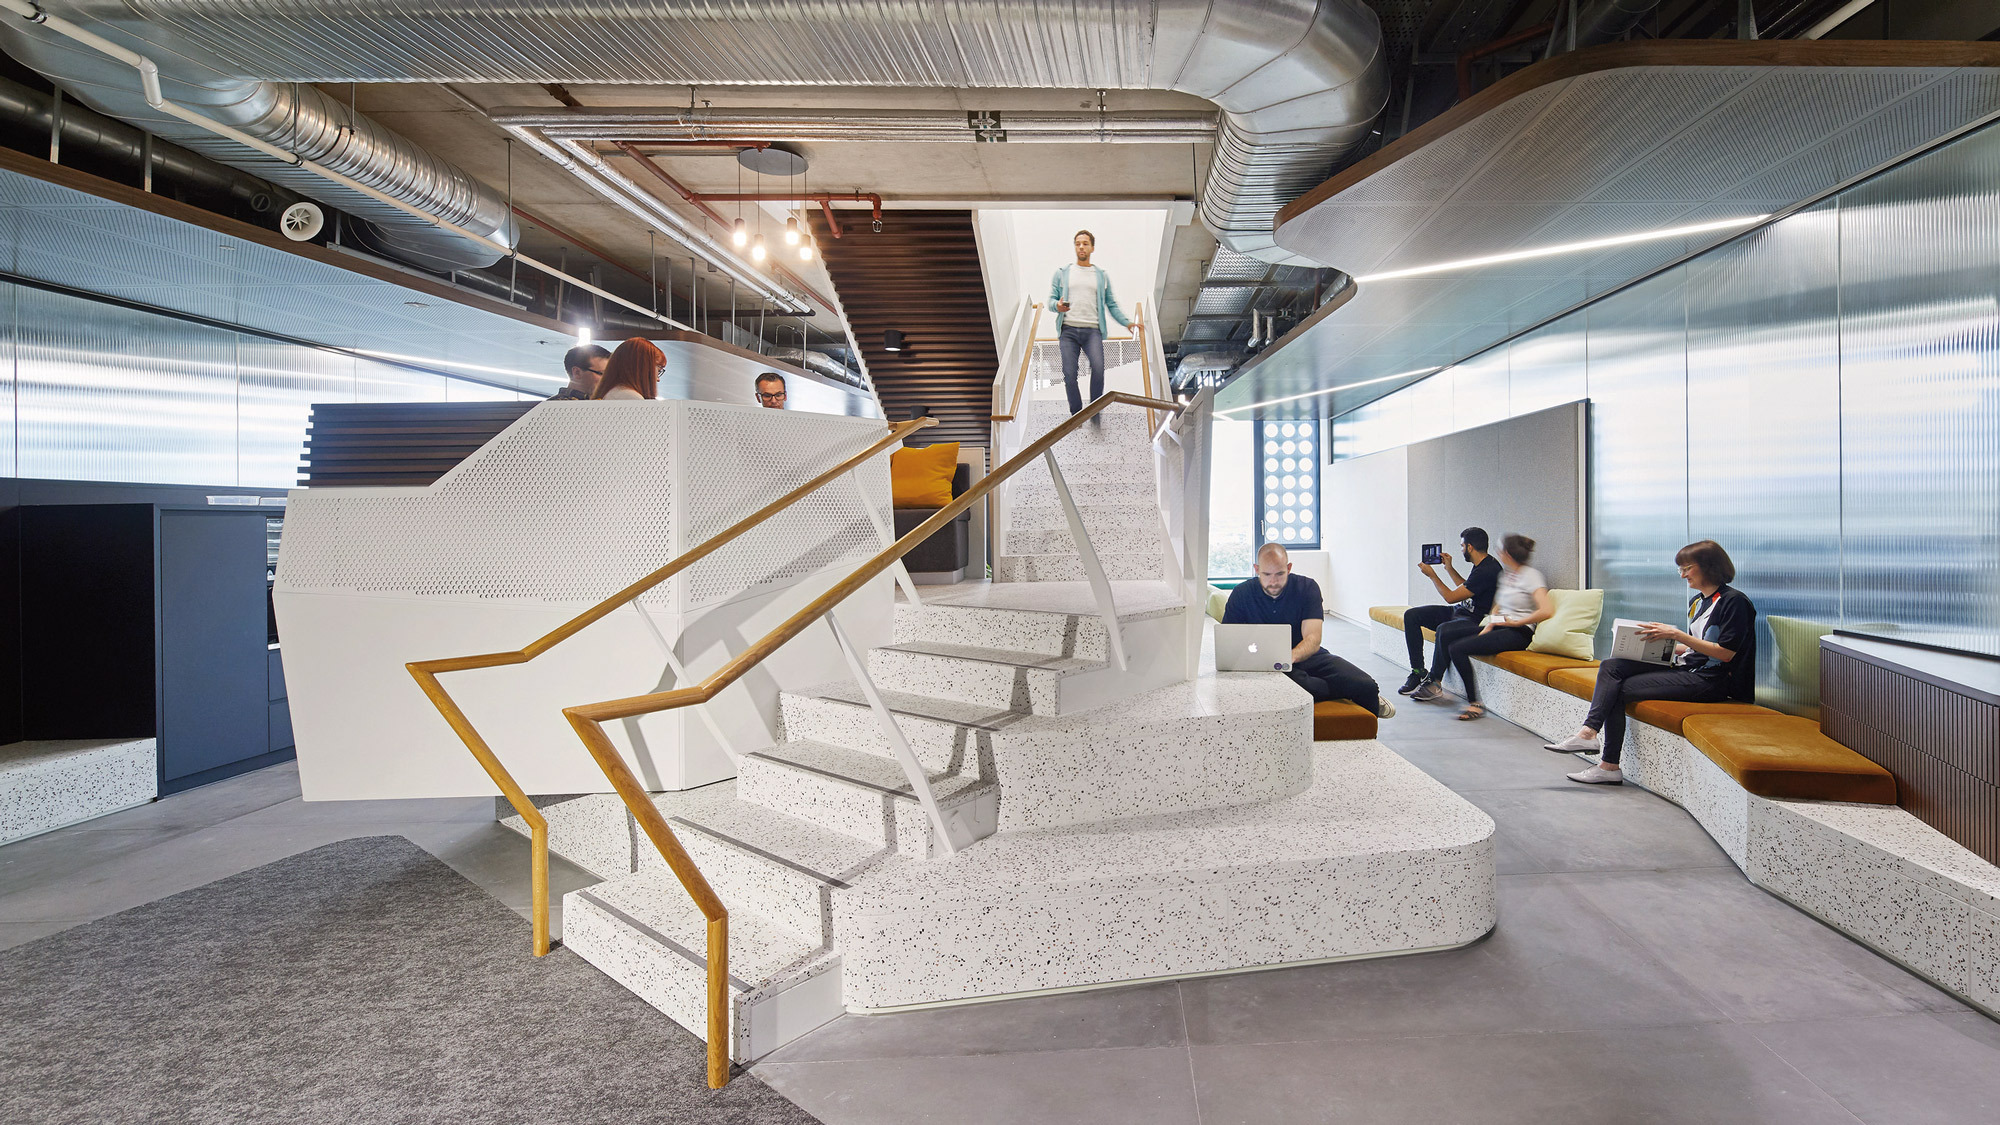 Modern office interior featuring a central floating staircase with white steps and gold accents. The surrounding open-concept space includes a lounge area with mustard yellow seating, exposed ductwork overhead, and people engaged in casual conversation, embodying a contemporary work environment.